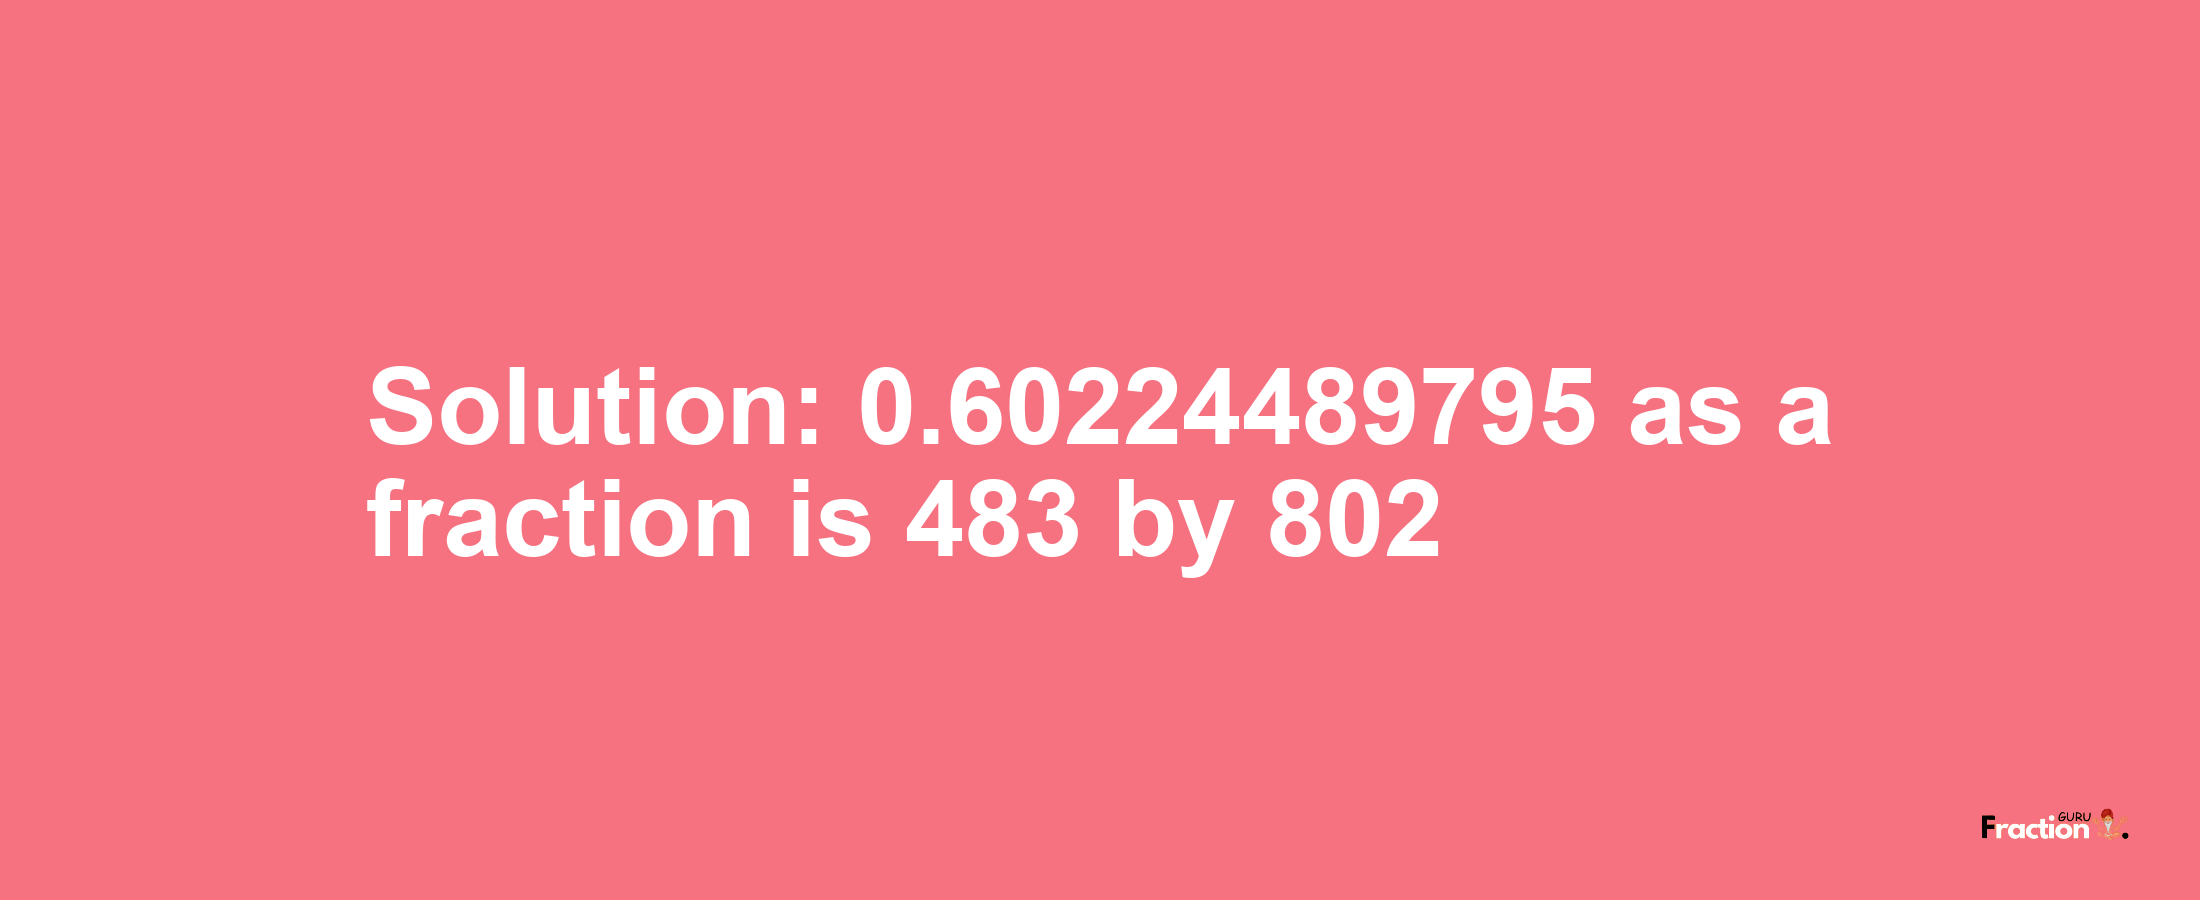 Solution:0.60224489795 as a fraction is 483/802